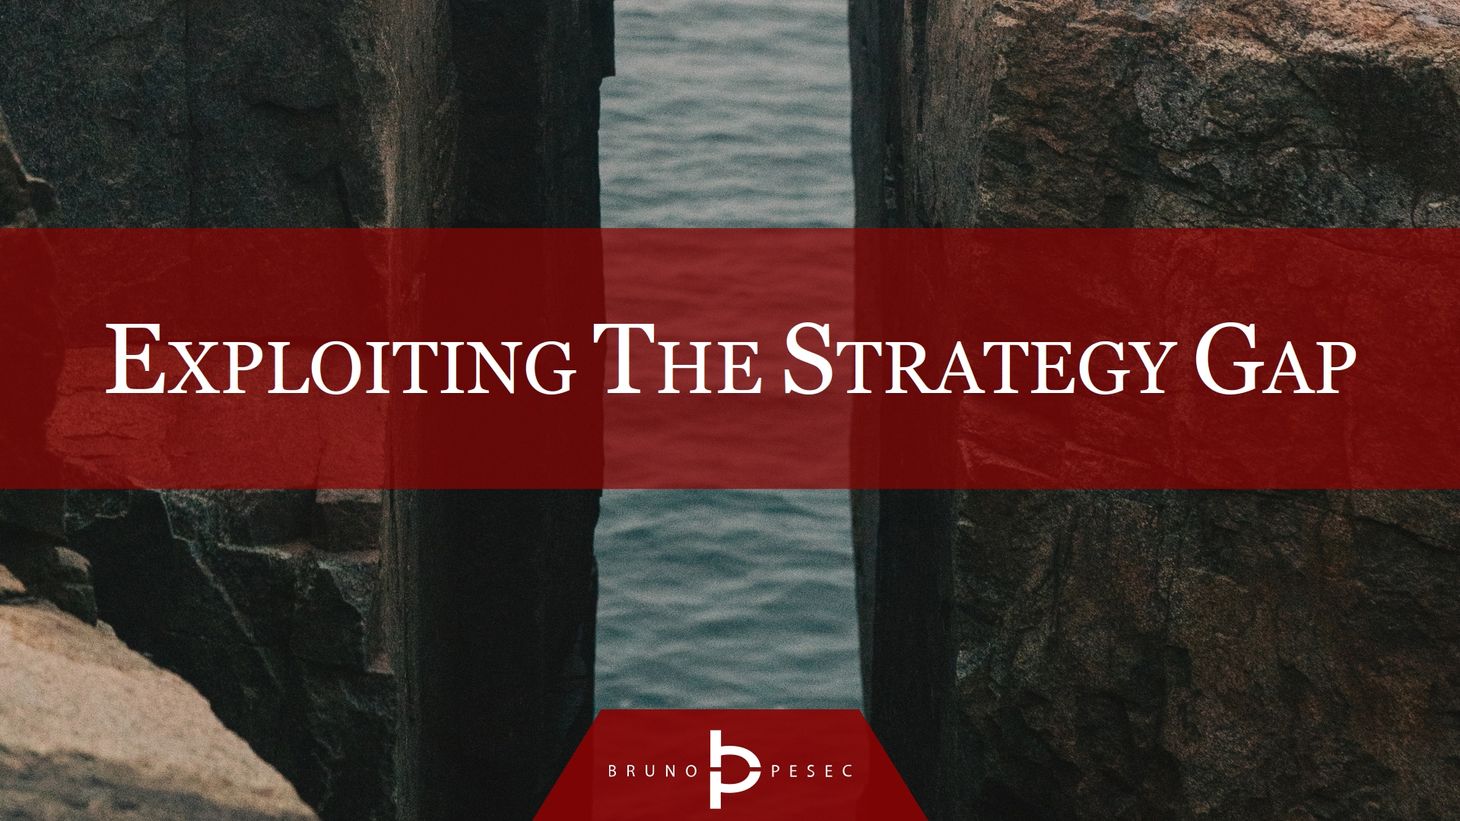 Exploiting the strategy gap